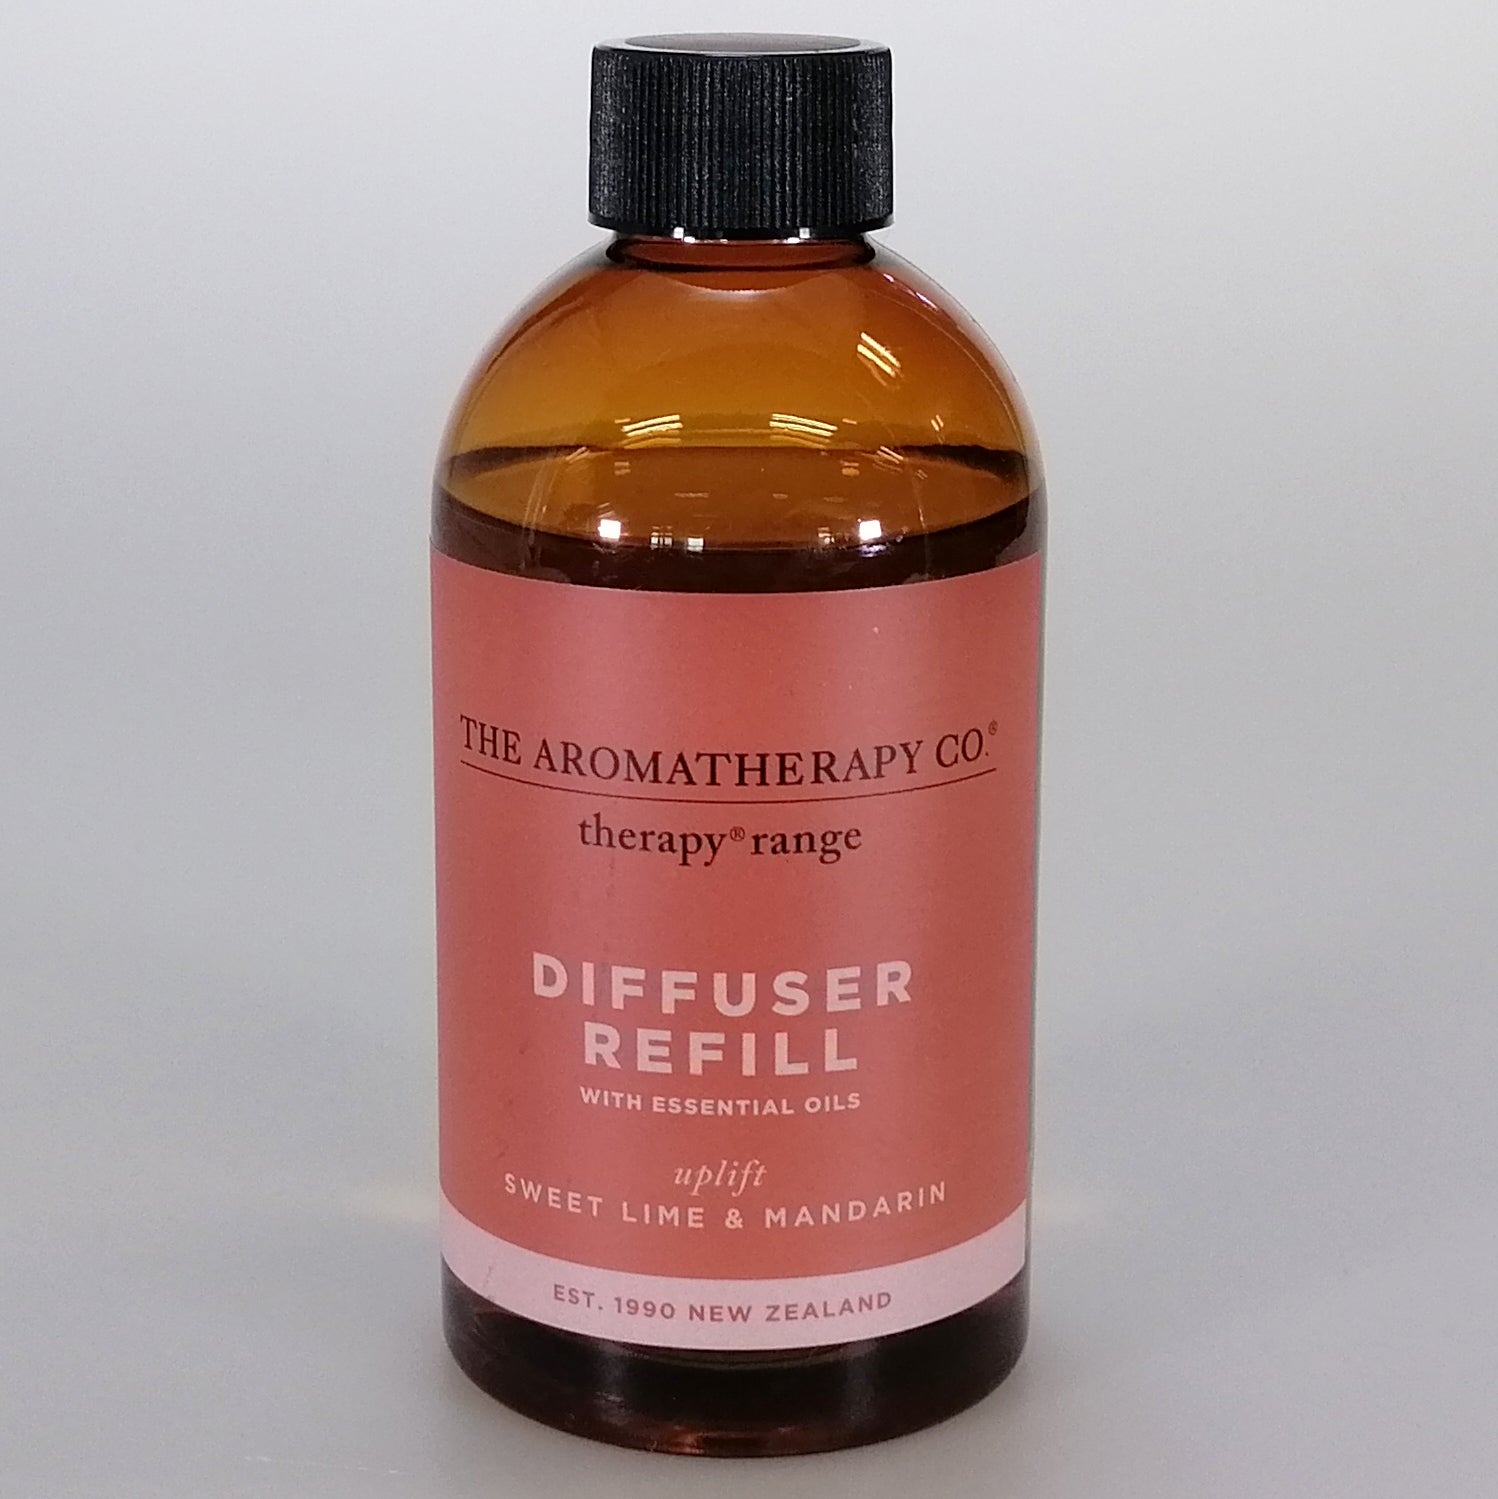 The Aromatherapy Company - Therapy Range 'Uplift' - Diffuser Refill - Sweet Lime & Mandarin